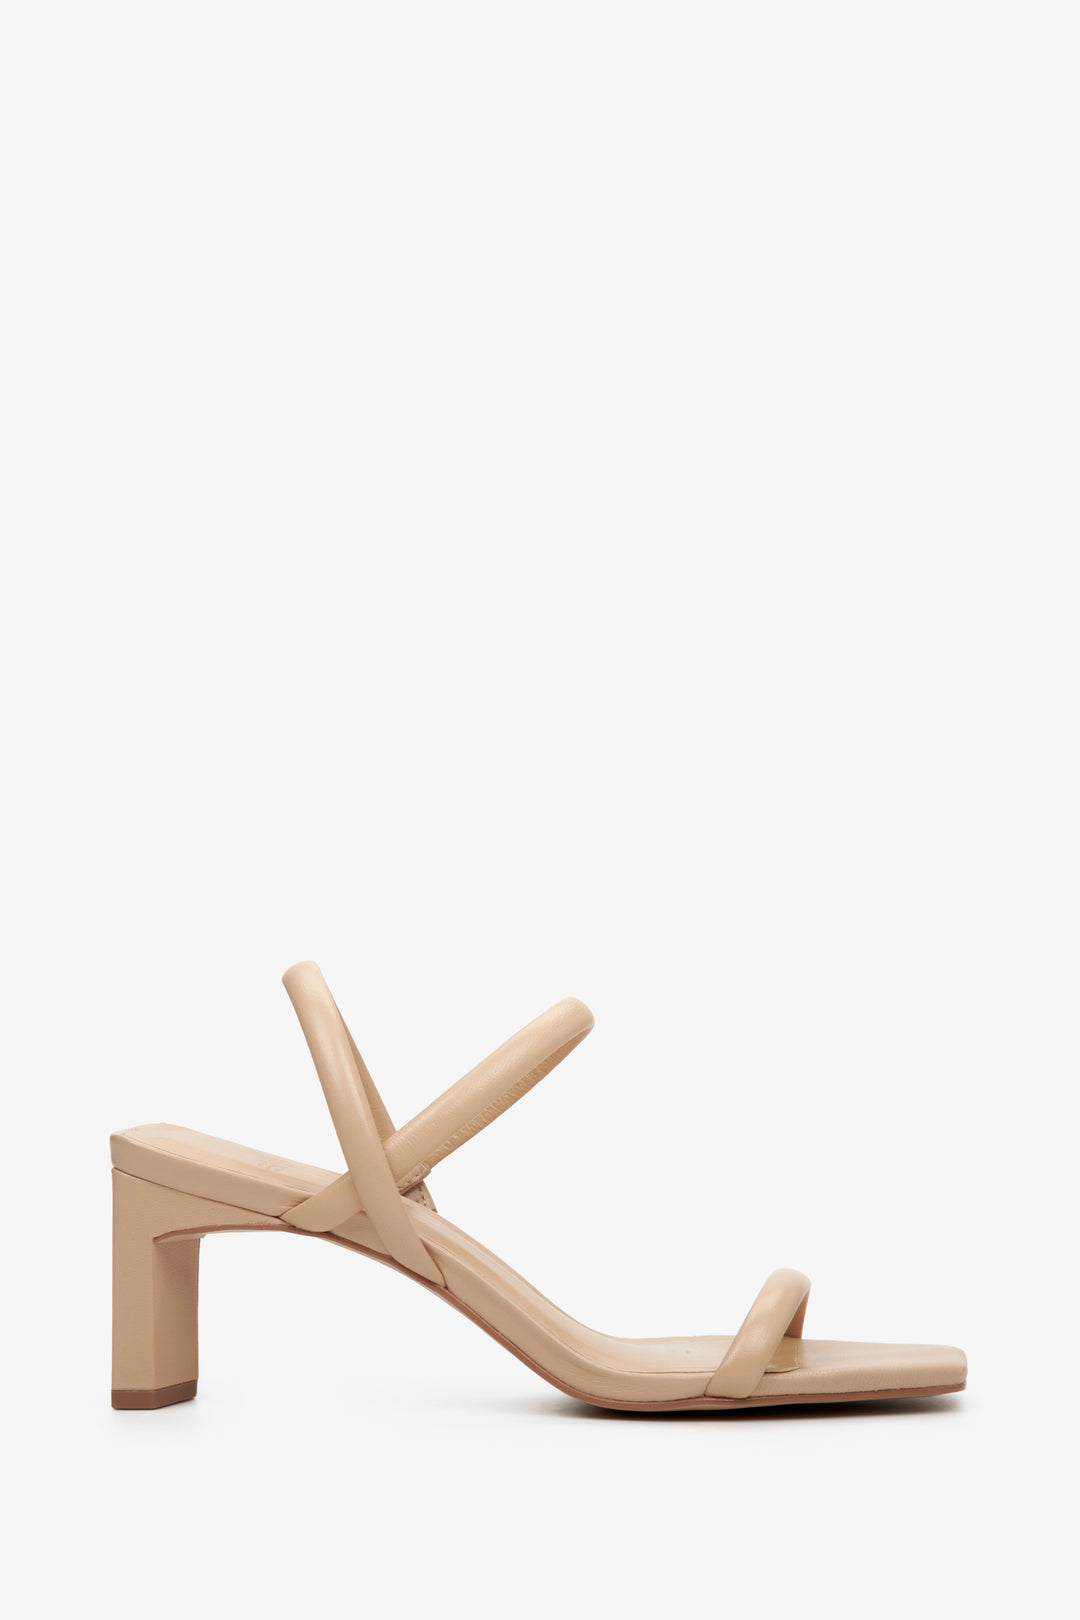 Comfortable, leather women's sandals with a block heel in beige color by Estro - shoe profile.